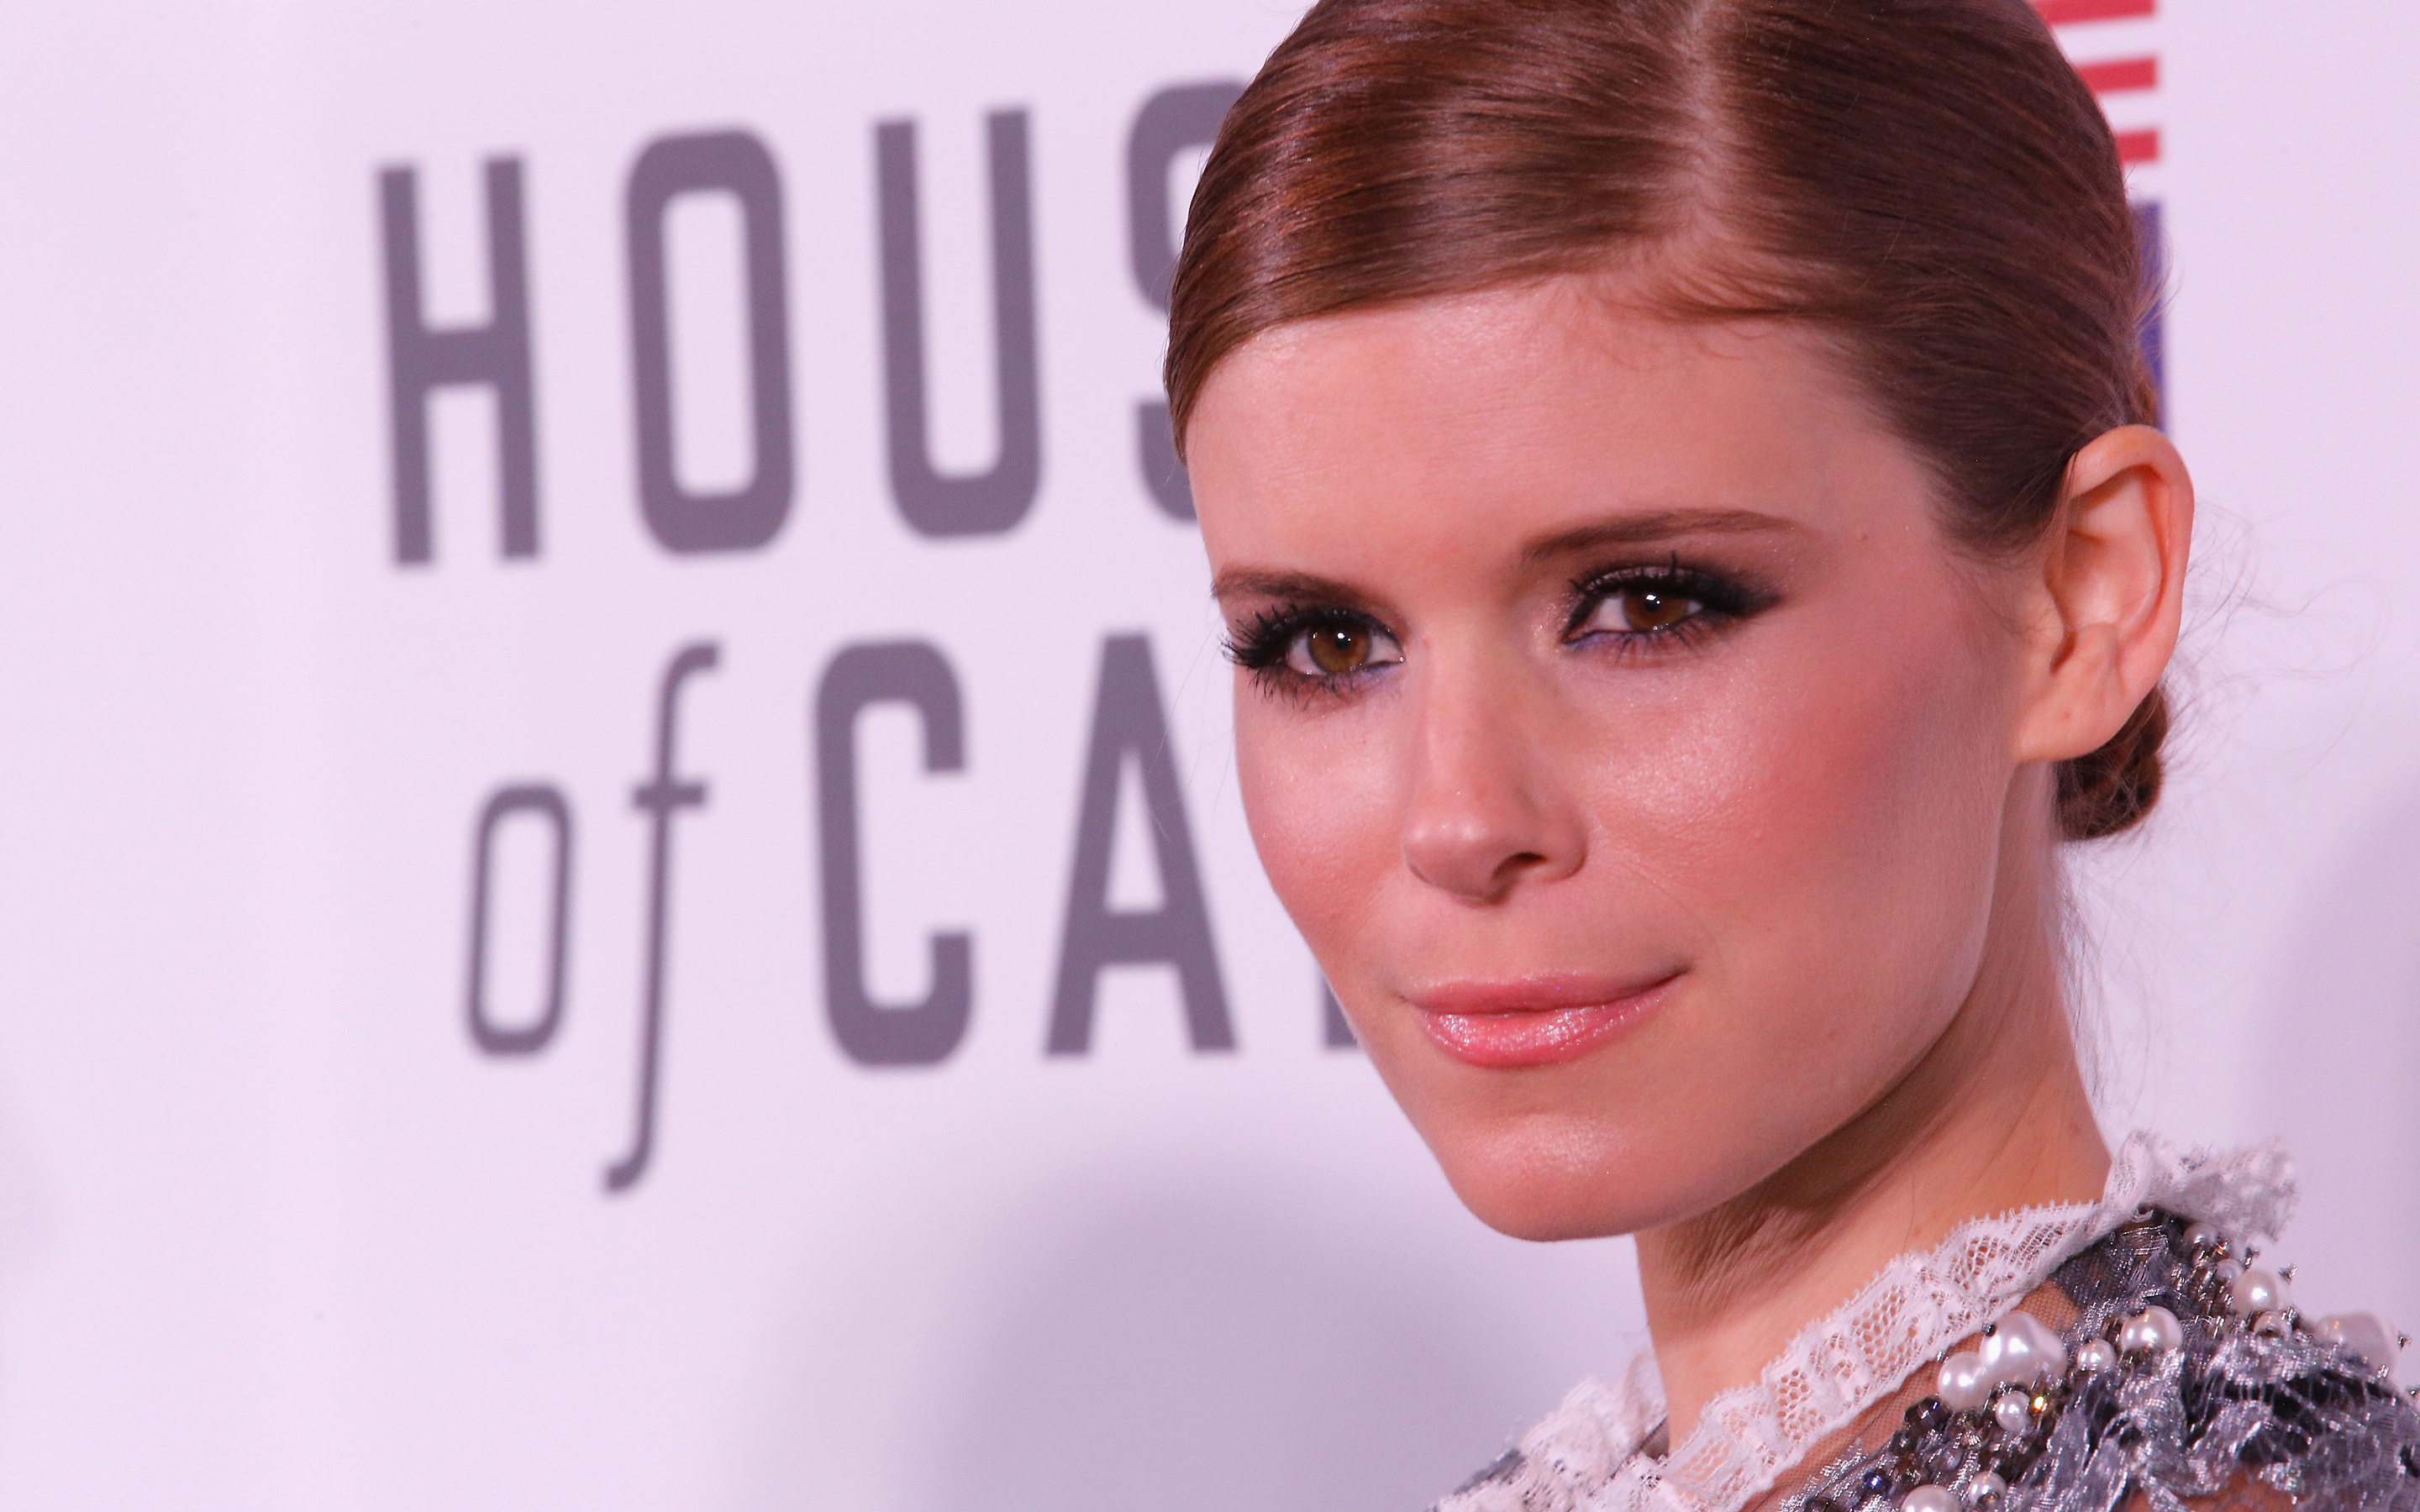 celebrity, kate mara, actress, american wallpapers for tablet